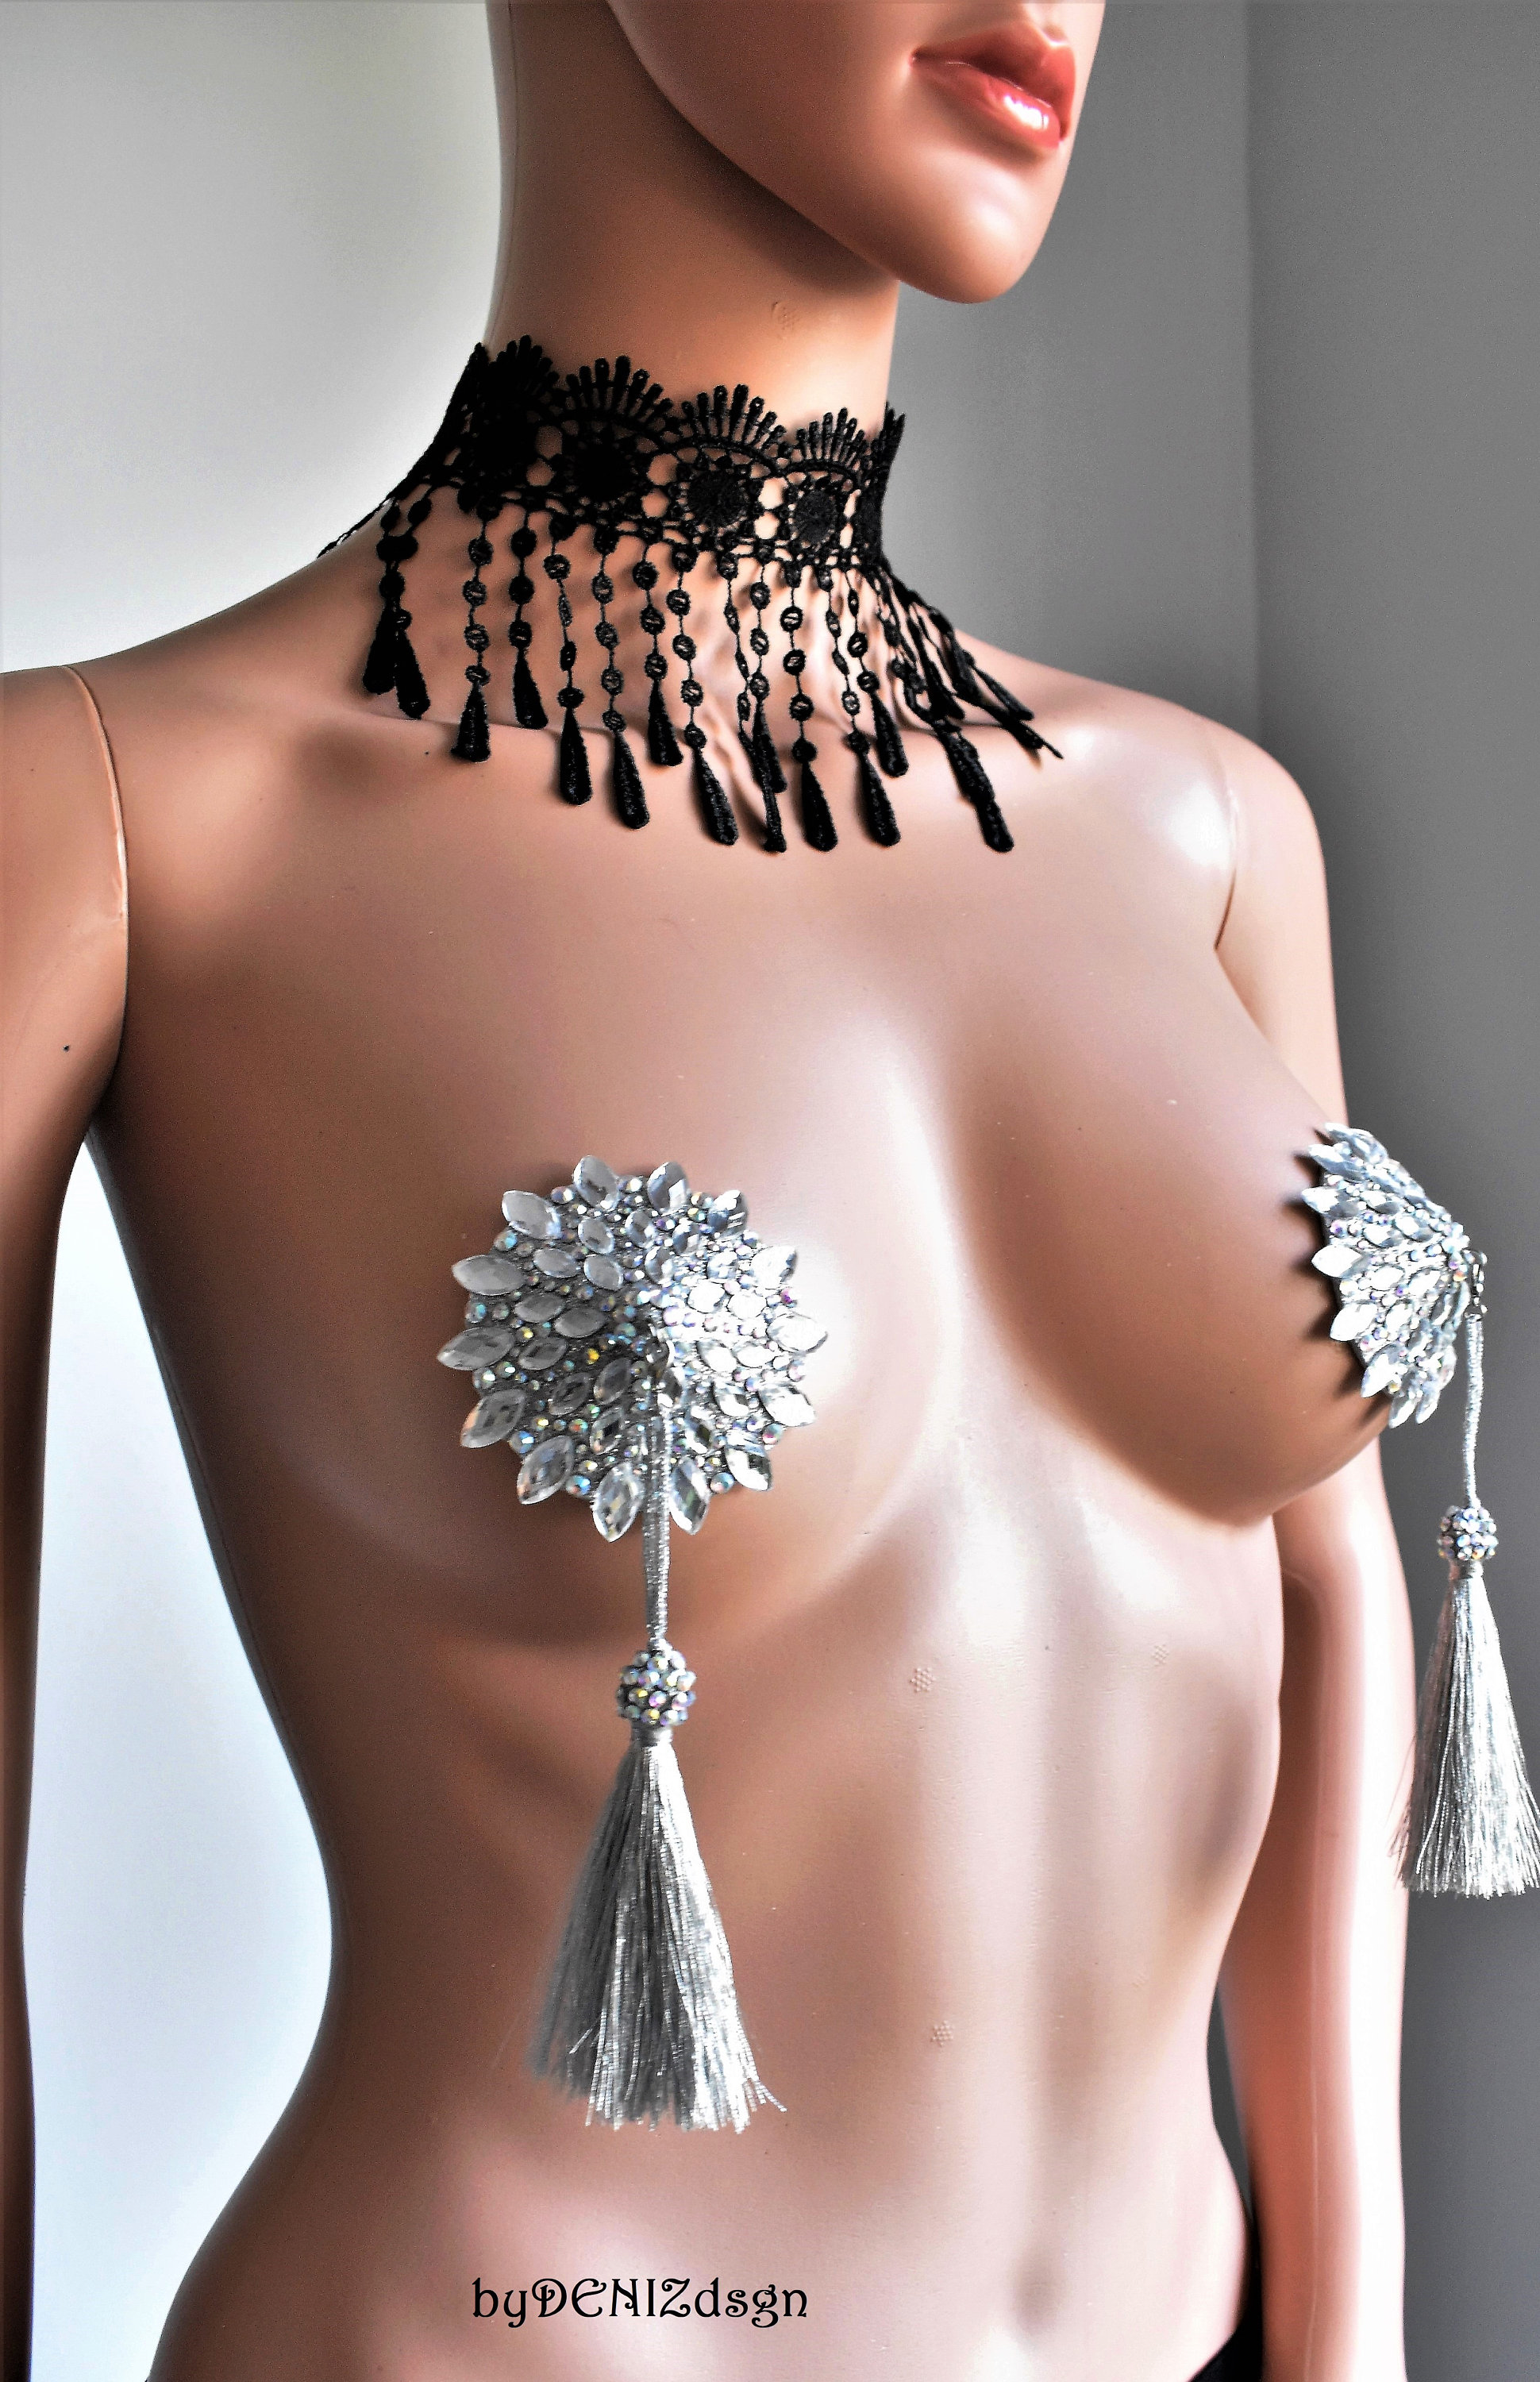 BLONDE AMBITION Rhinestone Silver Conical Pasties, Nipple Covers (2pcs) for  Lingerie Burlesque Raves Festivals and More